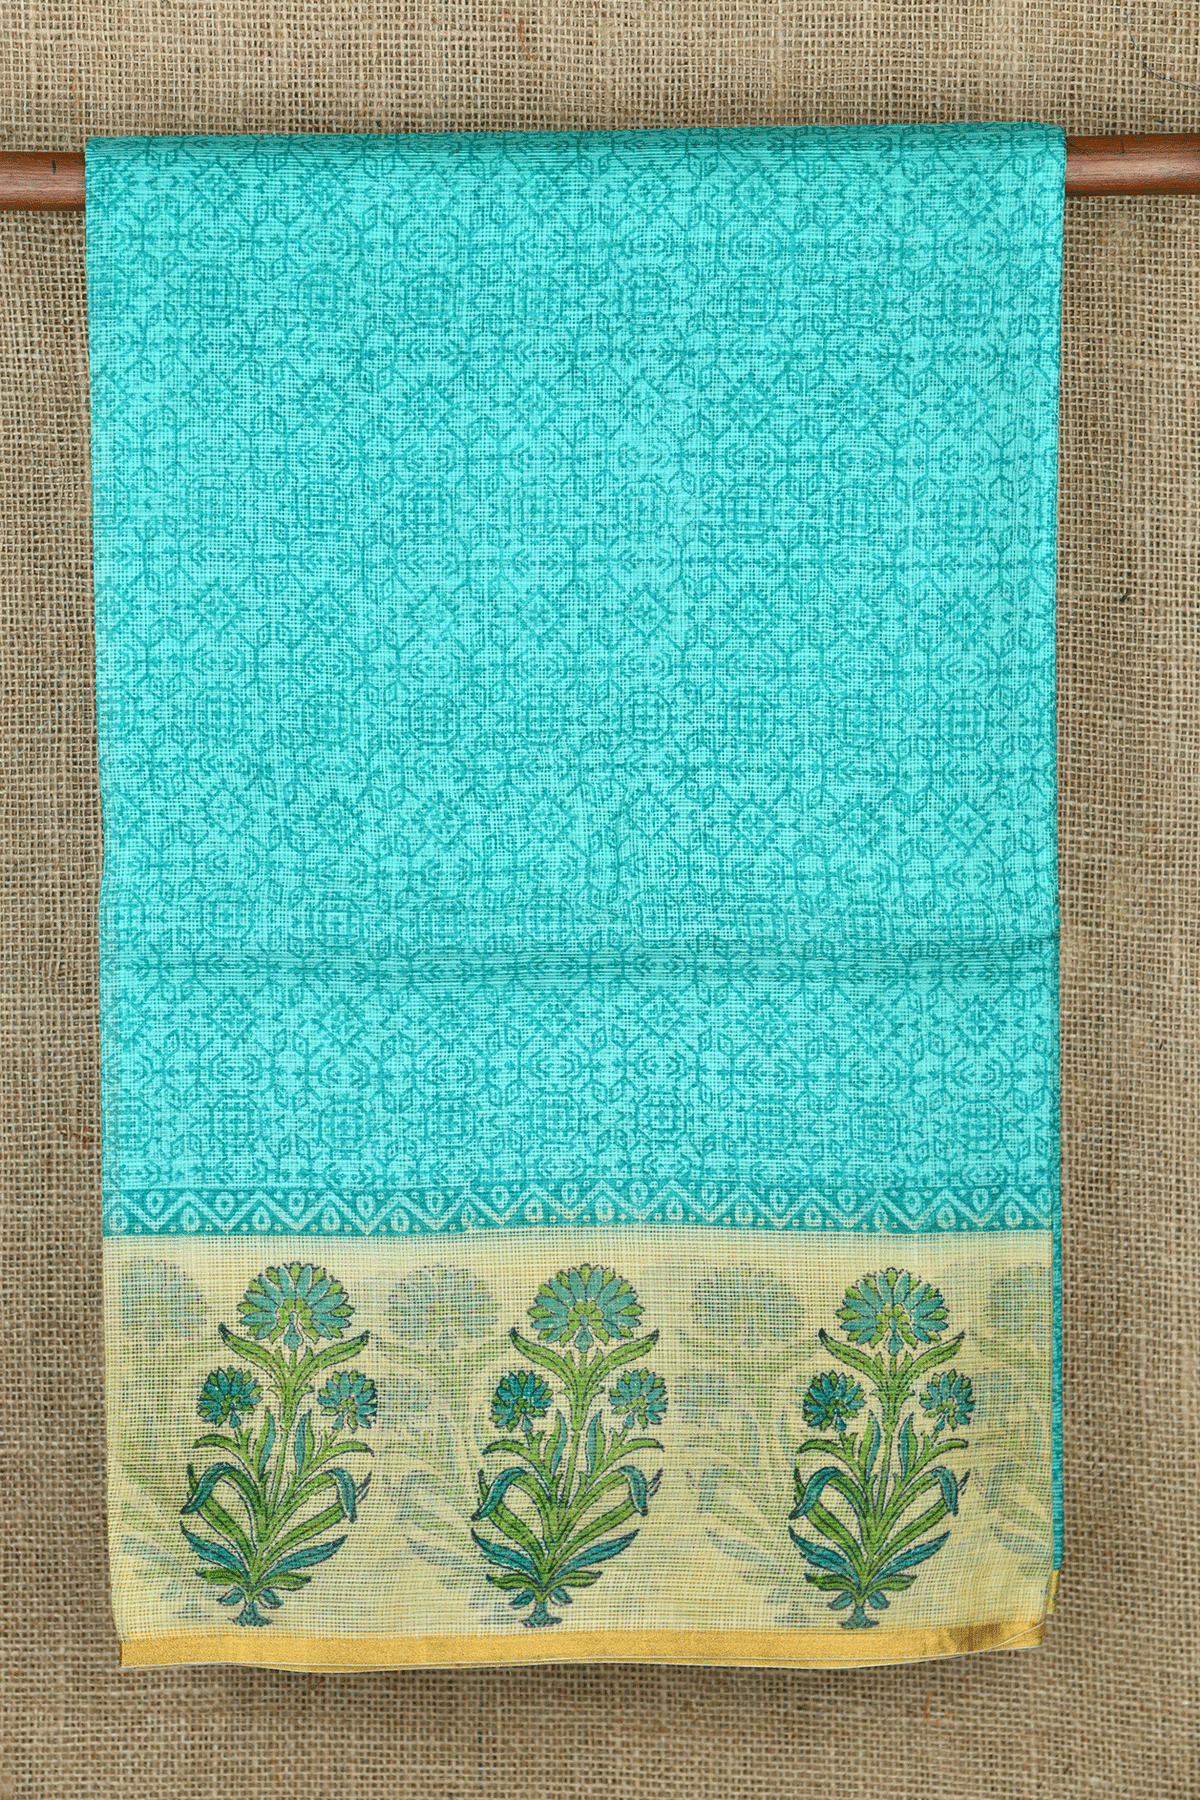 Floral Design Border With Allover Pattern Turquoise Blue Kota Cotton Saree